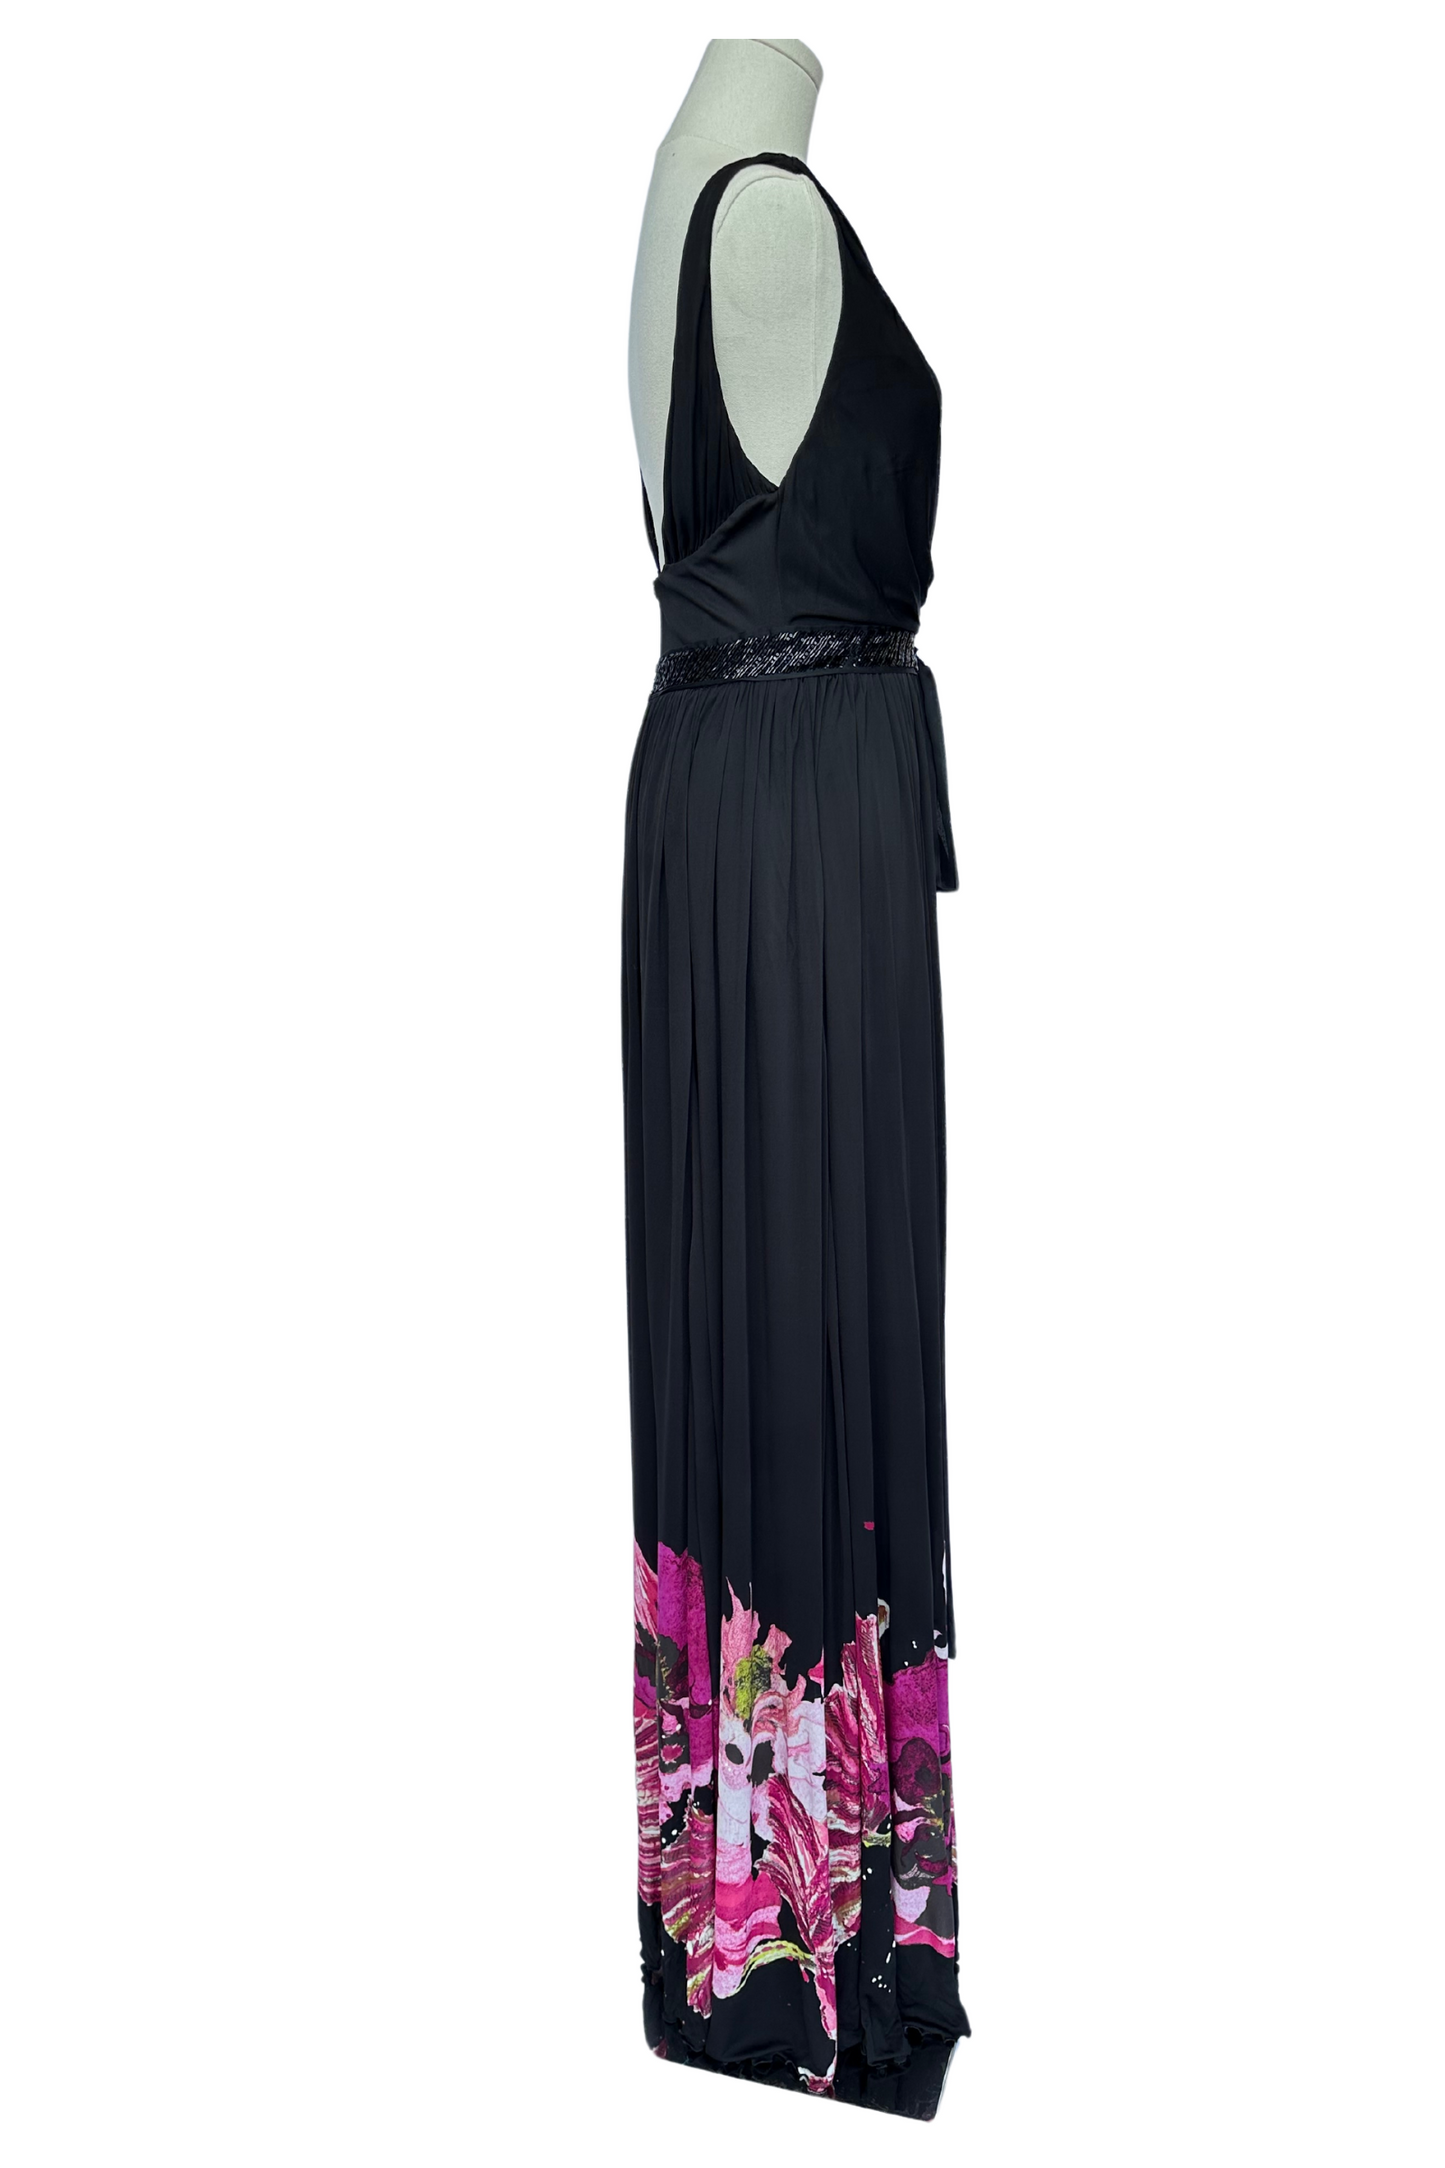 Roberto Cavalli Black Floral Printed and Embellished Waist Maxi Dress Size IT38